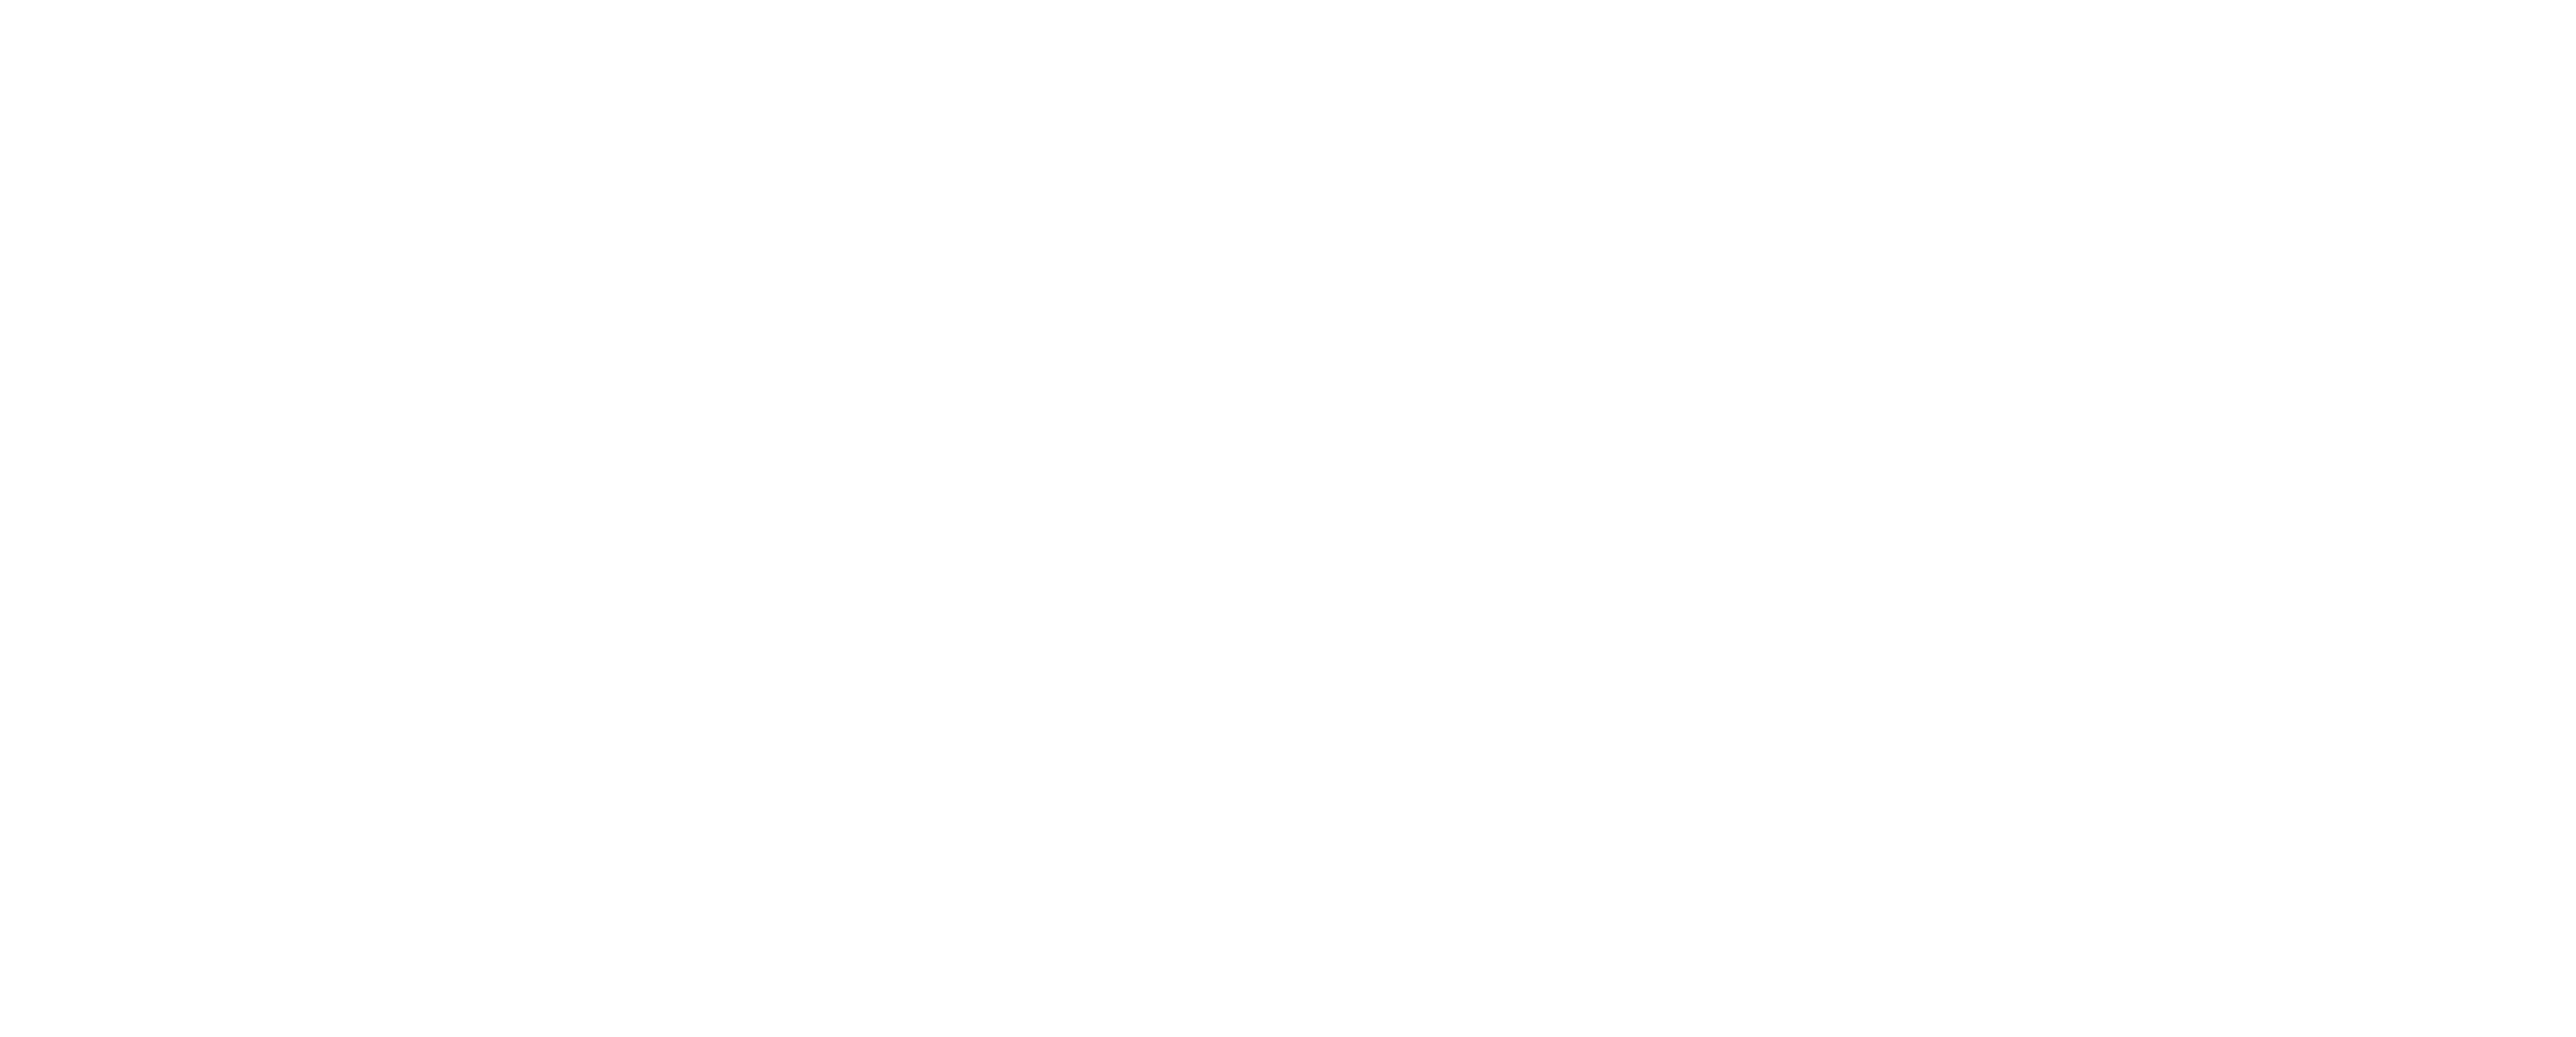 The Woman in the Wall logo